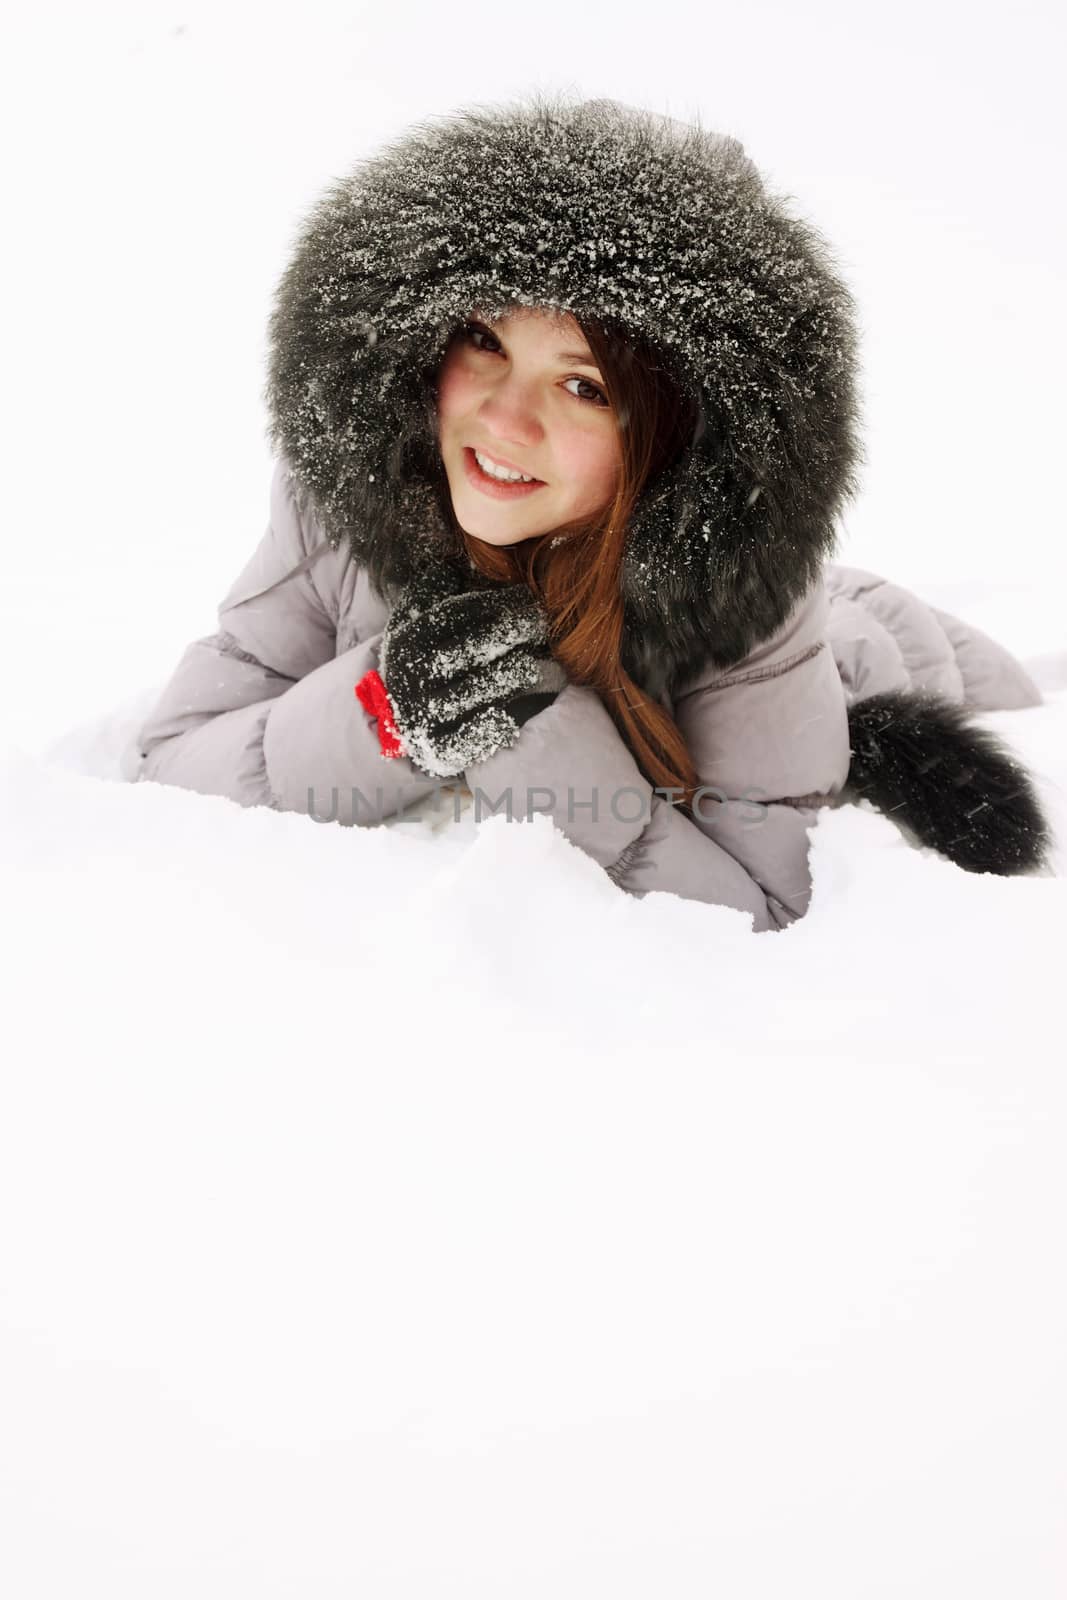 young woman in a fur hood in snow